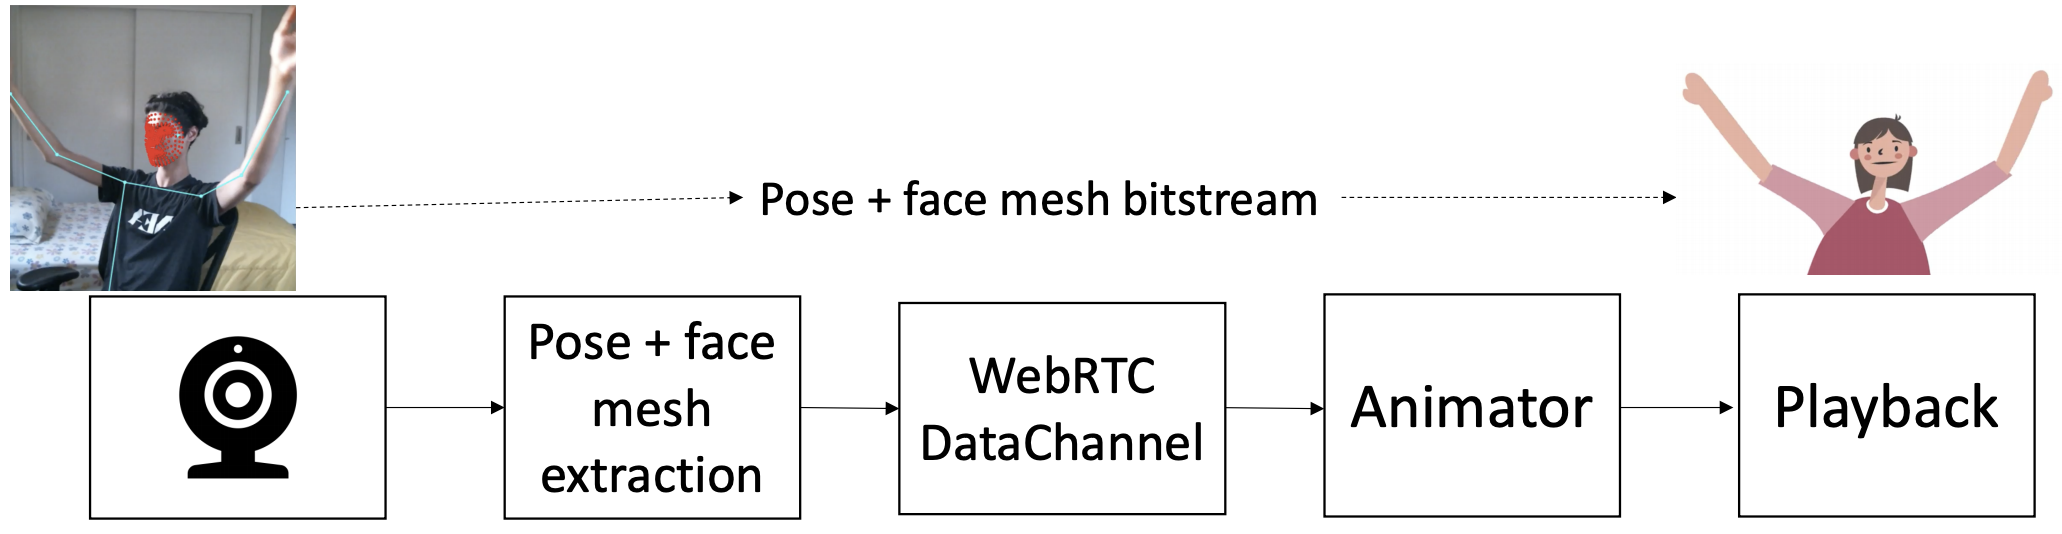 Keypoint based streaming